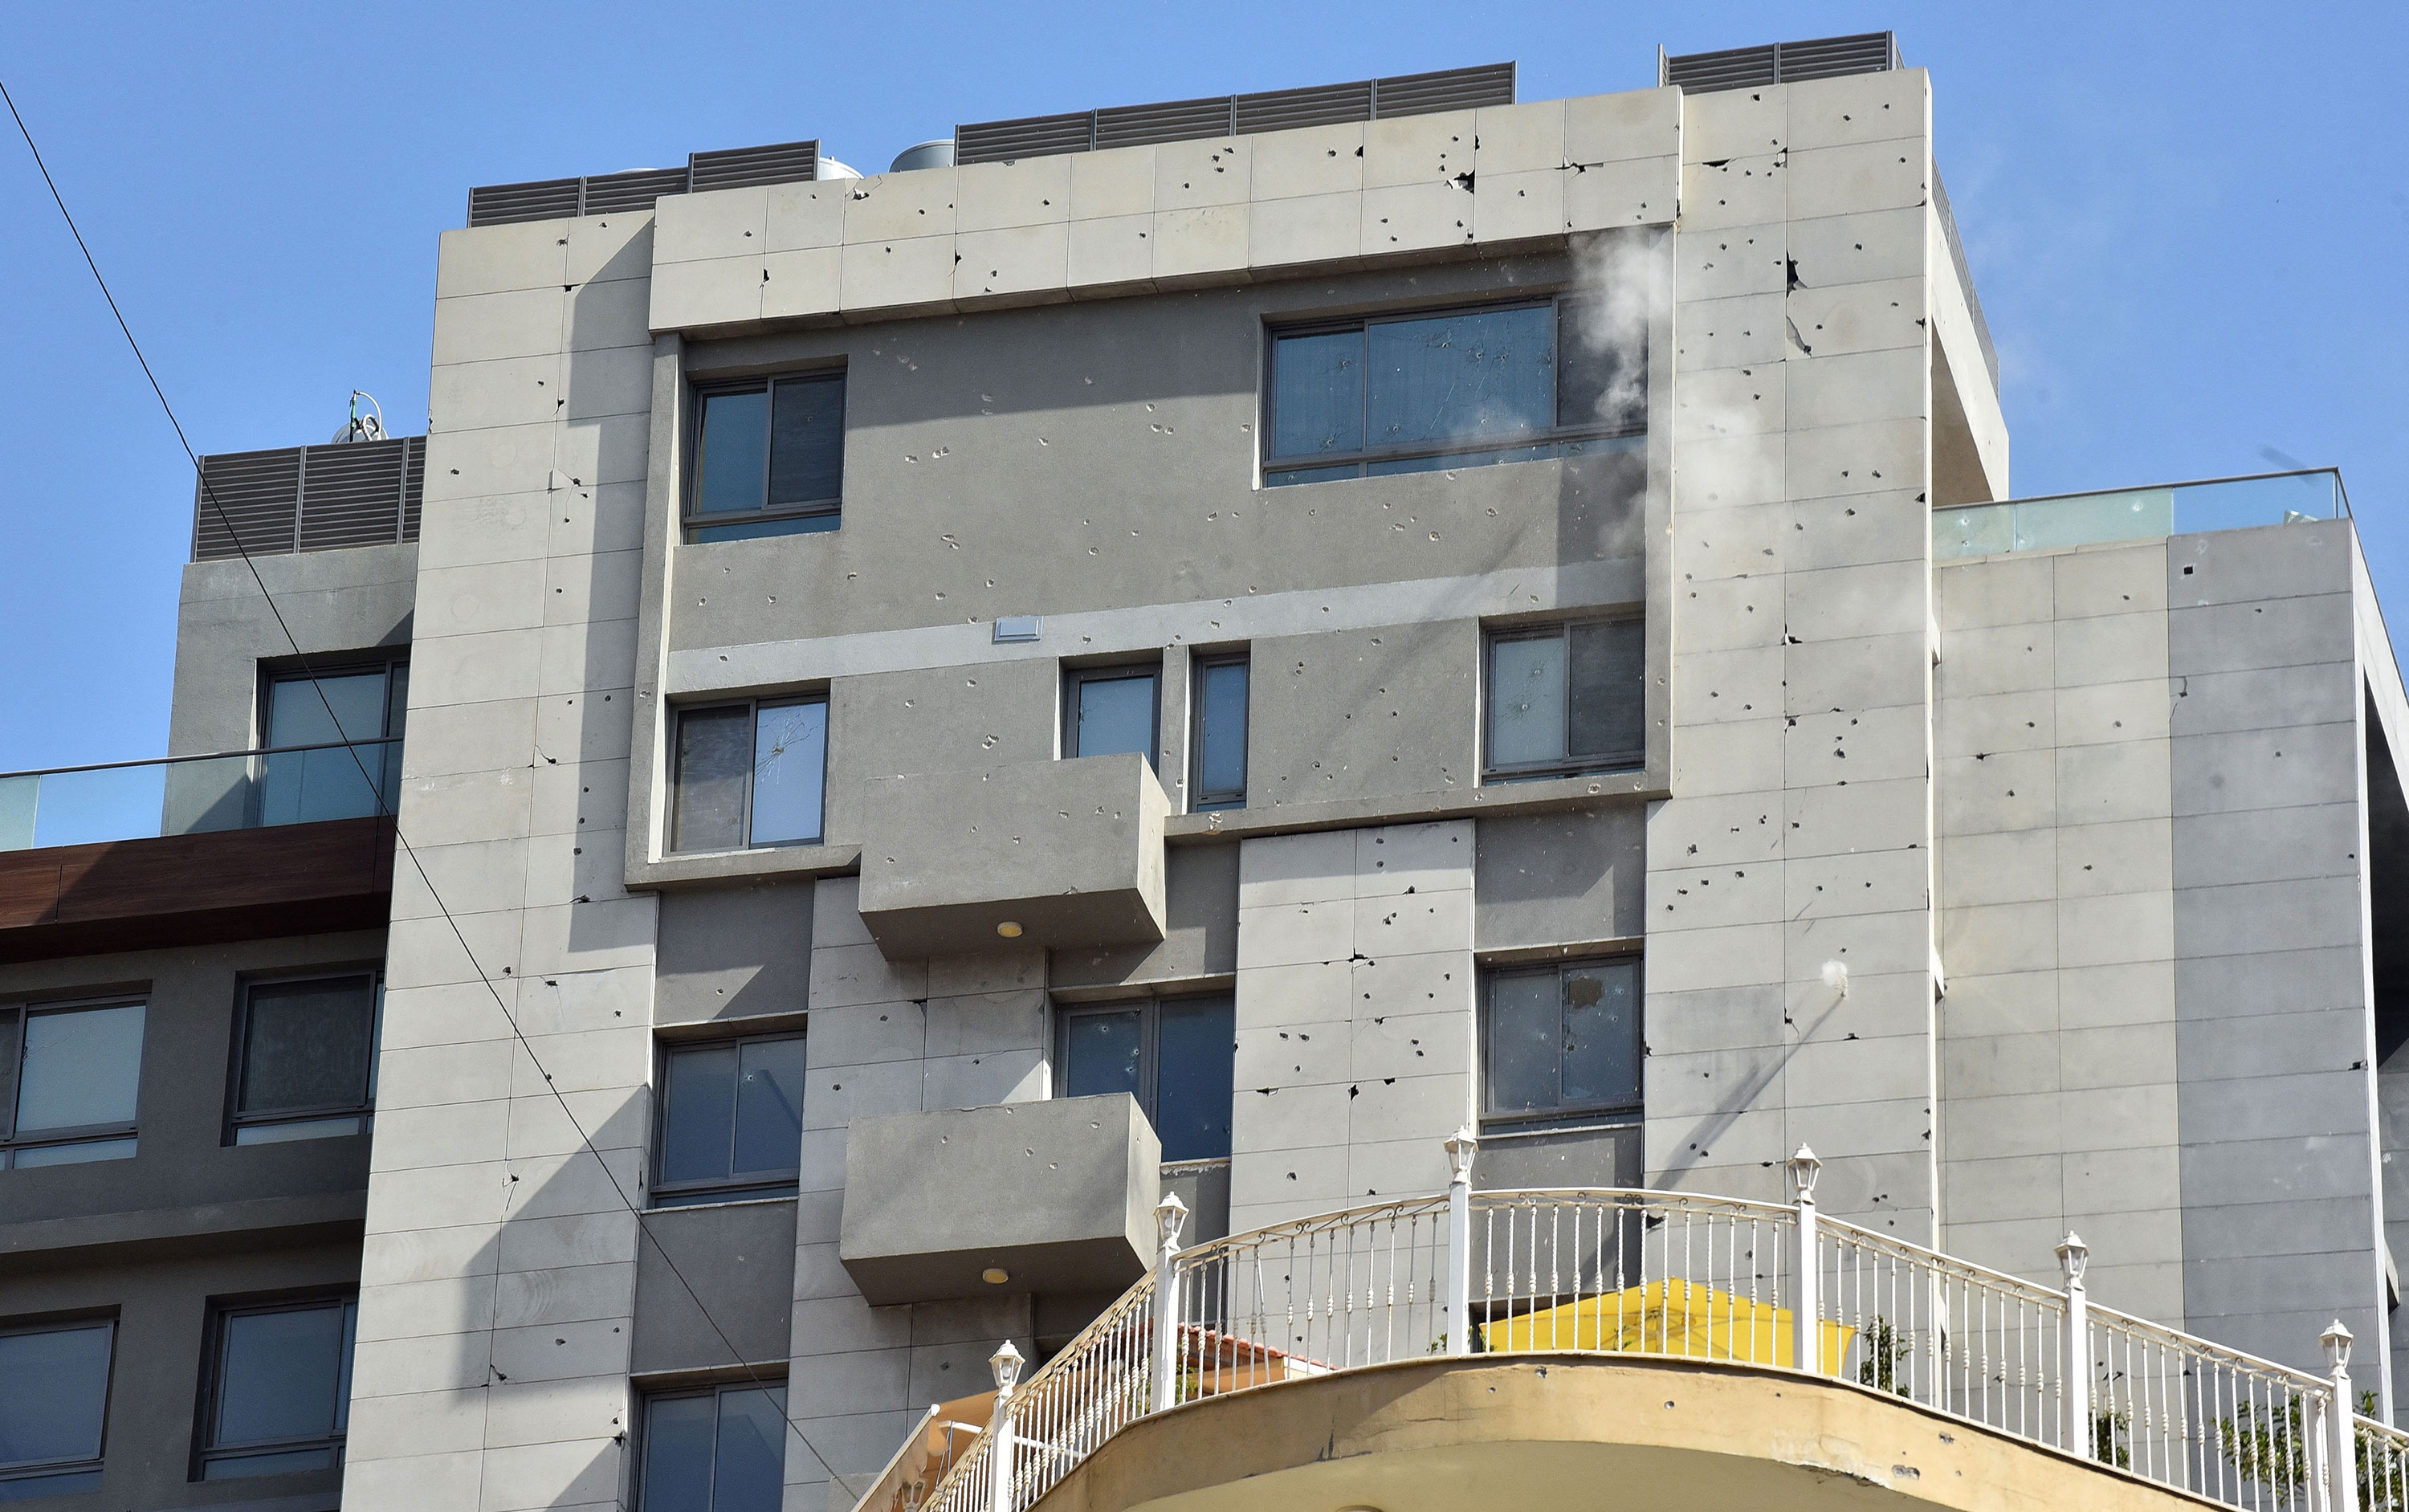 Bullets hit a building amidst clashes in Beirut on Thursday.